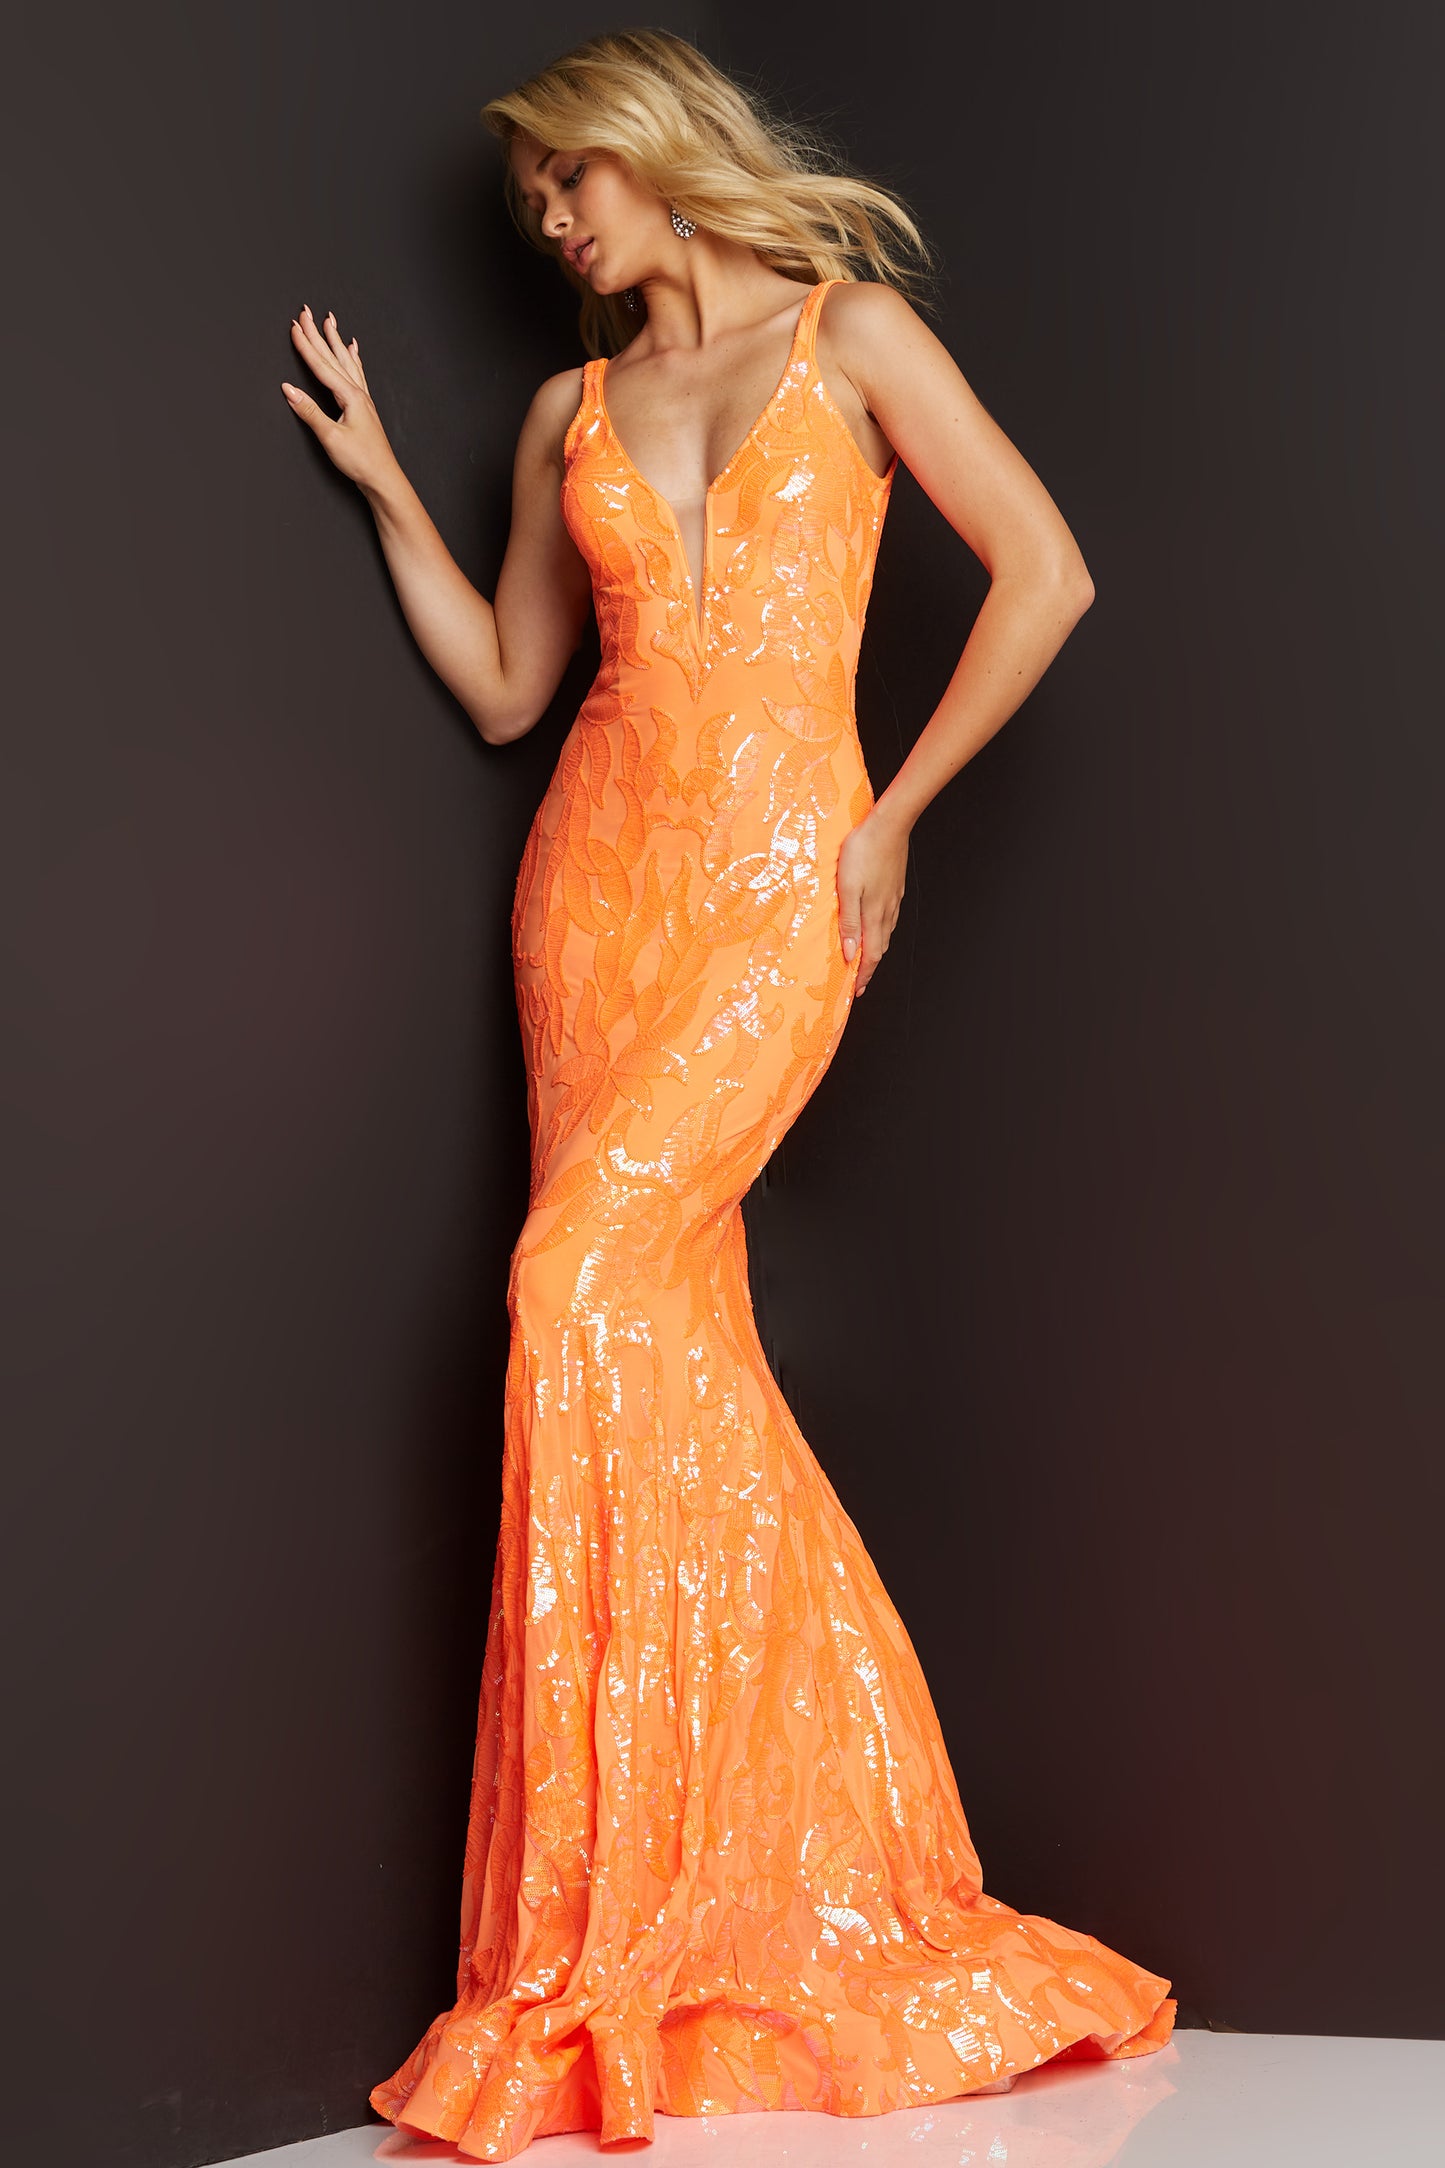 Jovani-3263-Orange-prom-dress-front-2-v-neckline-sequins-long-v-backJovani 3263 is a long Fitted Mermaid Prom Dress with a damask print sequin embellished pattern. Plunging V Neckline and open V Back. Lush Trumpet Skirt is great for the stage in this formal evening gown & Pageant Dress. wedding dress  Available Sizes: 00-24  Available Colors: BLACK/GUNMETAL, BLACK/ROSE, GREEN/MULTI, HOT PINK, LIGHT BLUE, LIGHT PINK, NEON GREEN, ORANGE, YELLOW